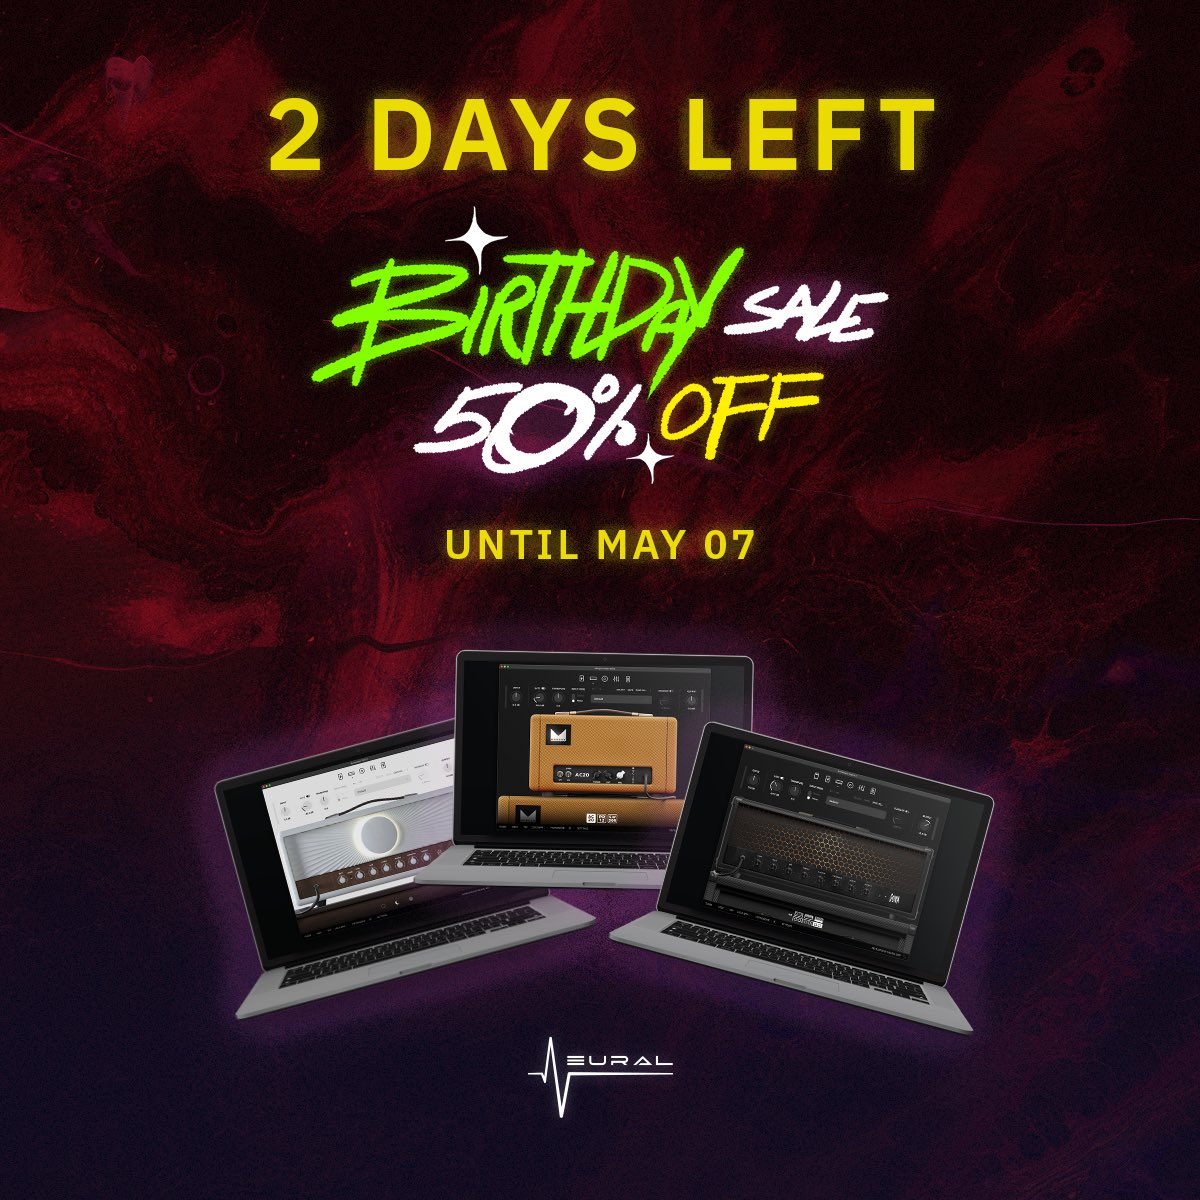 The FOMO will be so real on May 8th, because you will have missed out on our Birthday Sale. 🎉👎😞👎🎉 2 days left! 50% off ALL plugins until May 7th! 🔥 neuraldsp.com/plugins